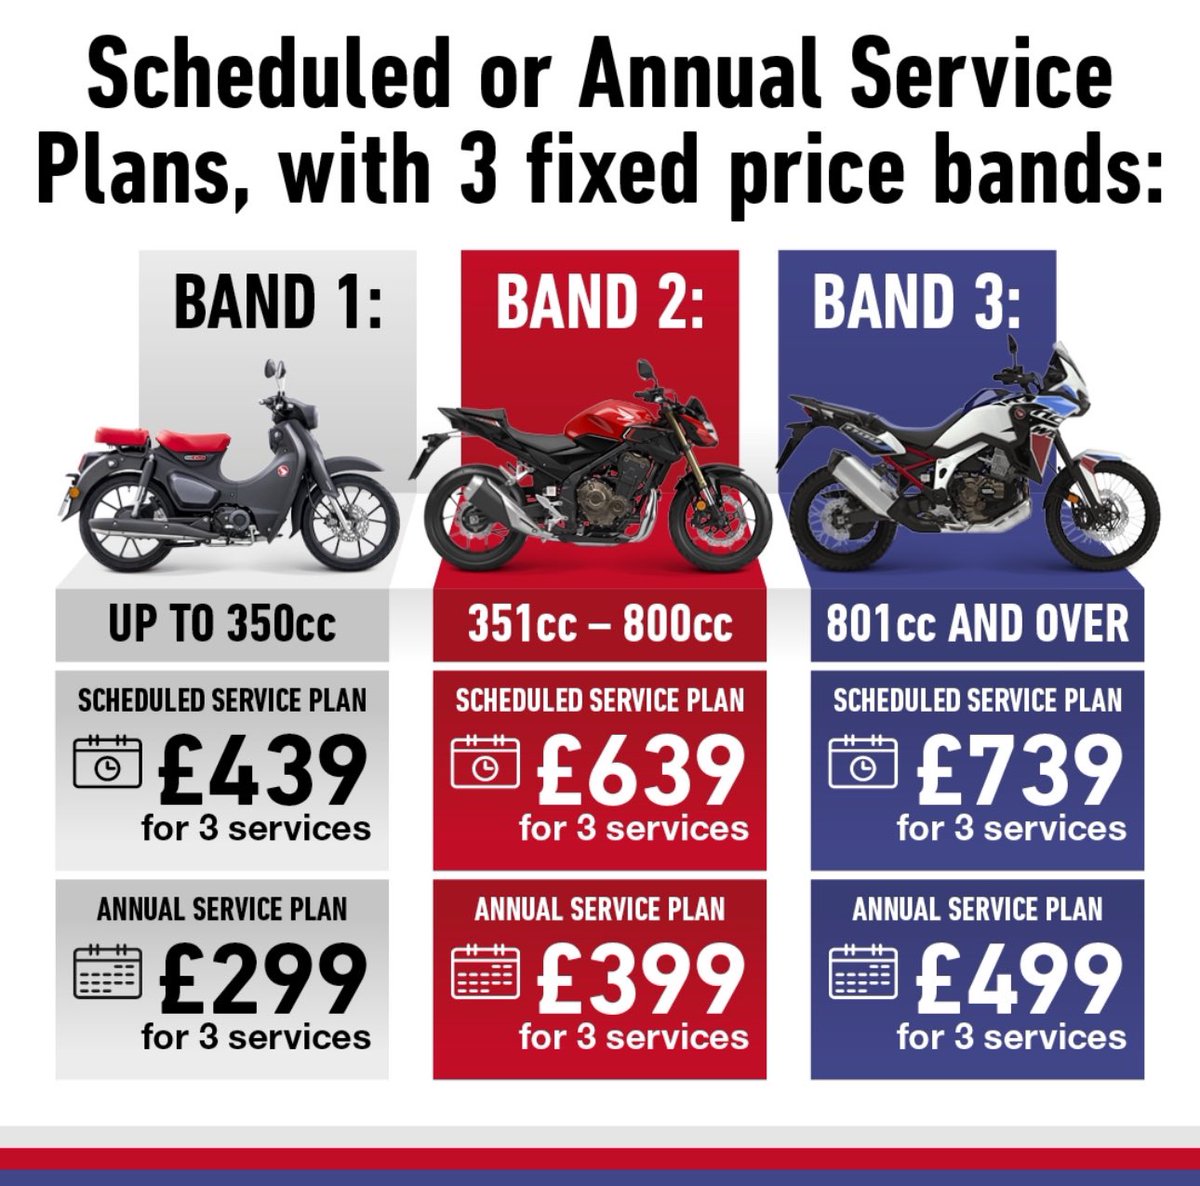 On all new @HondaUKBikes you can get your own tailored service plan making maintenance that bit simpler. Speak to the sales team for further information #motorcycleservice #serviceplan #westsussexbusiness #hondabike